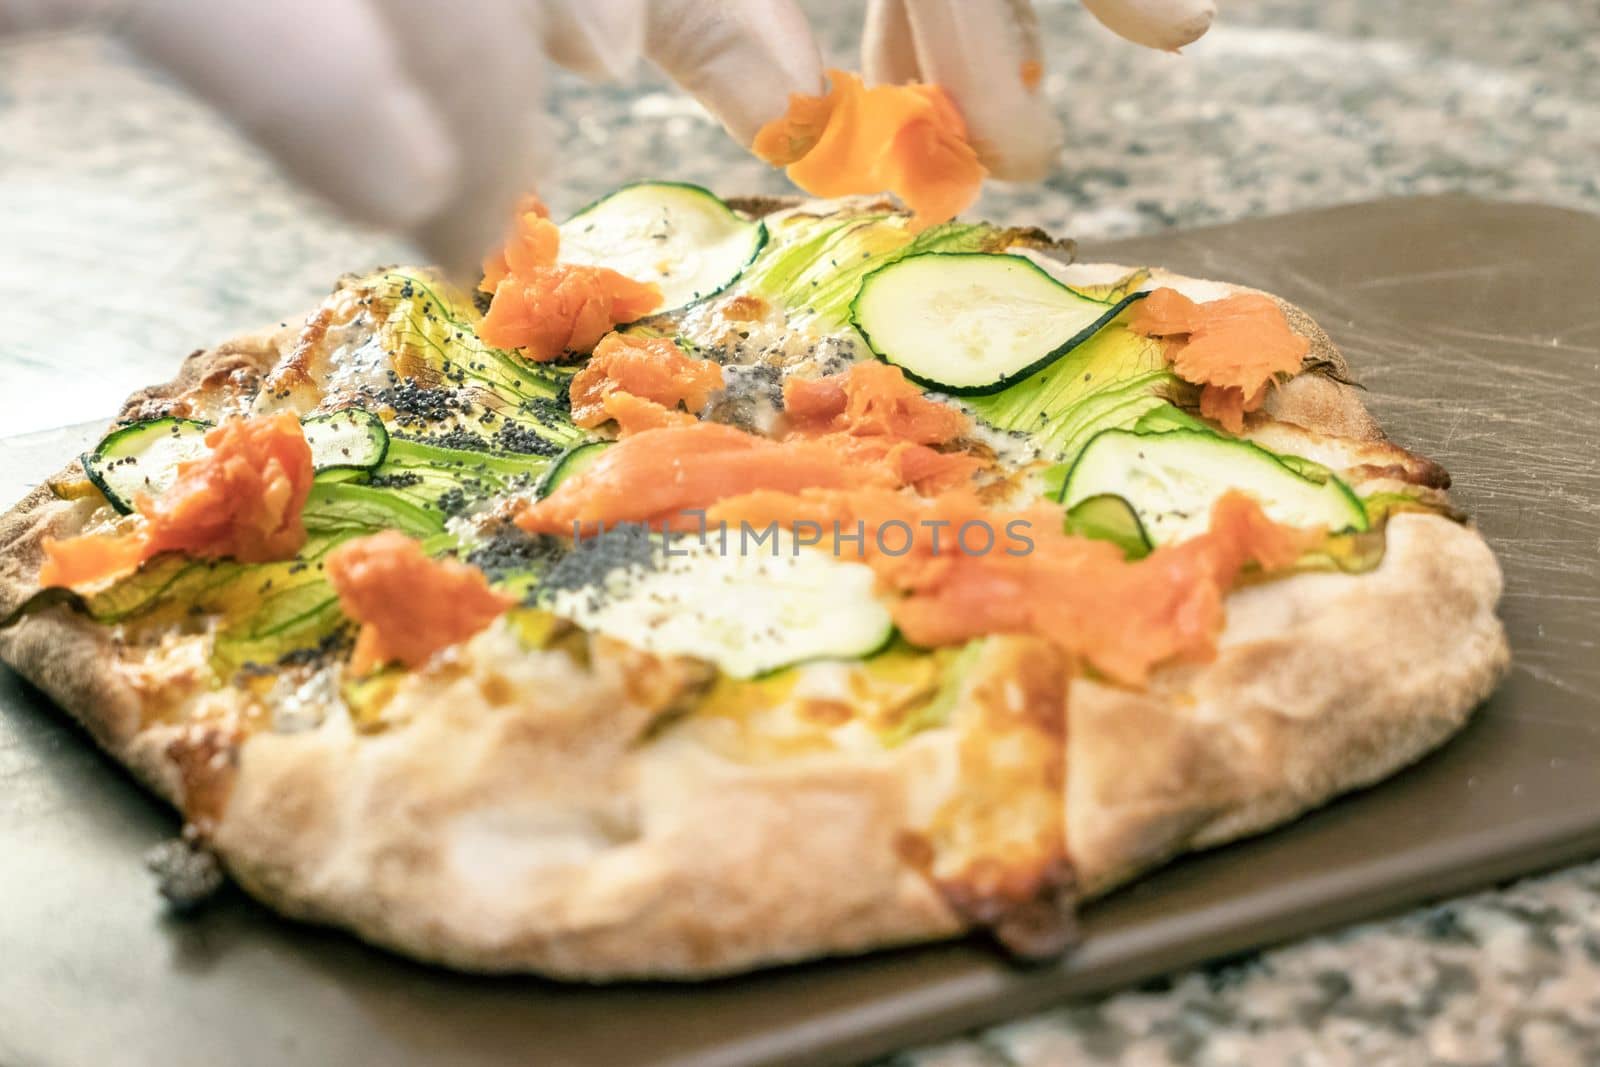 Delicious gourmet pizza with smoked salmon and courgette flowers. From above a hand with latex gloves decorates the pizza.